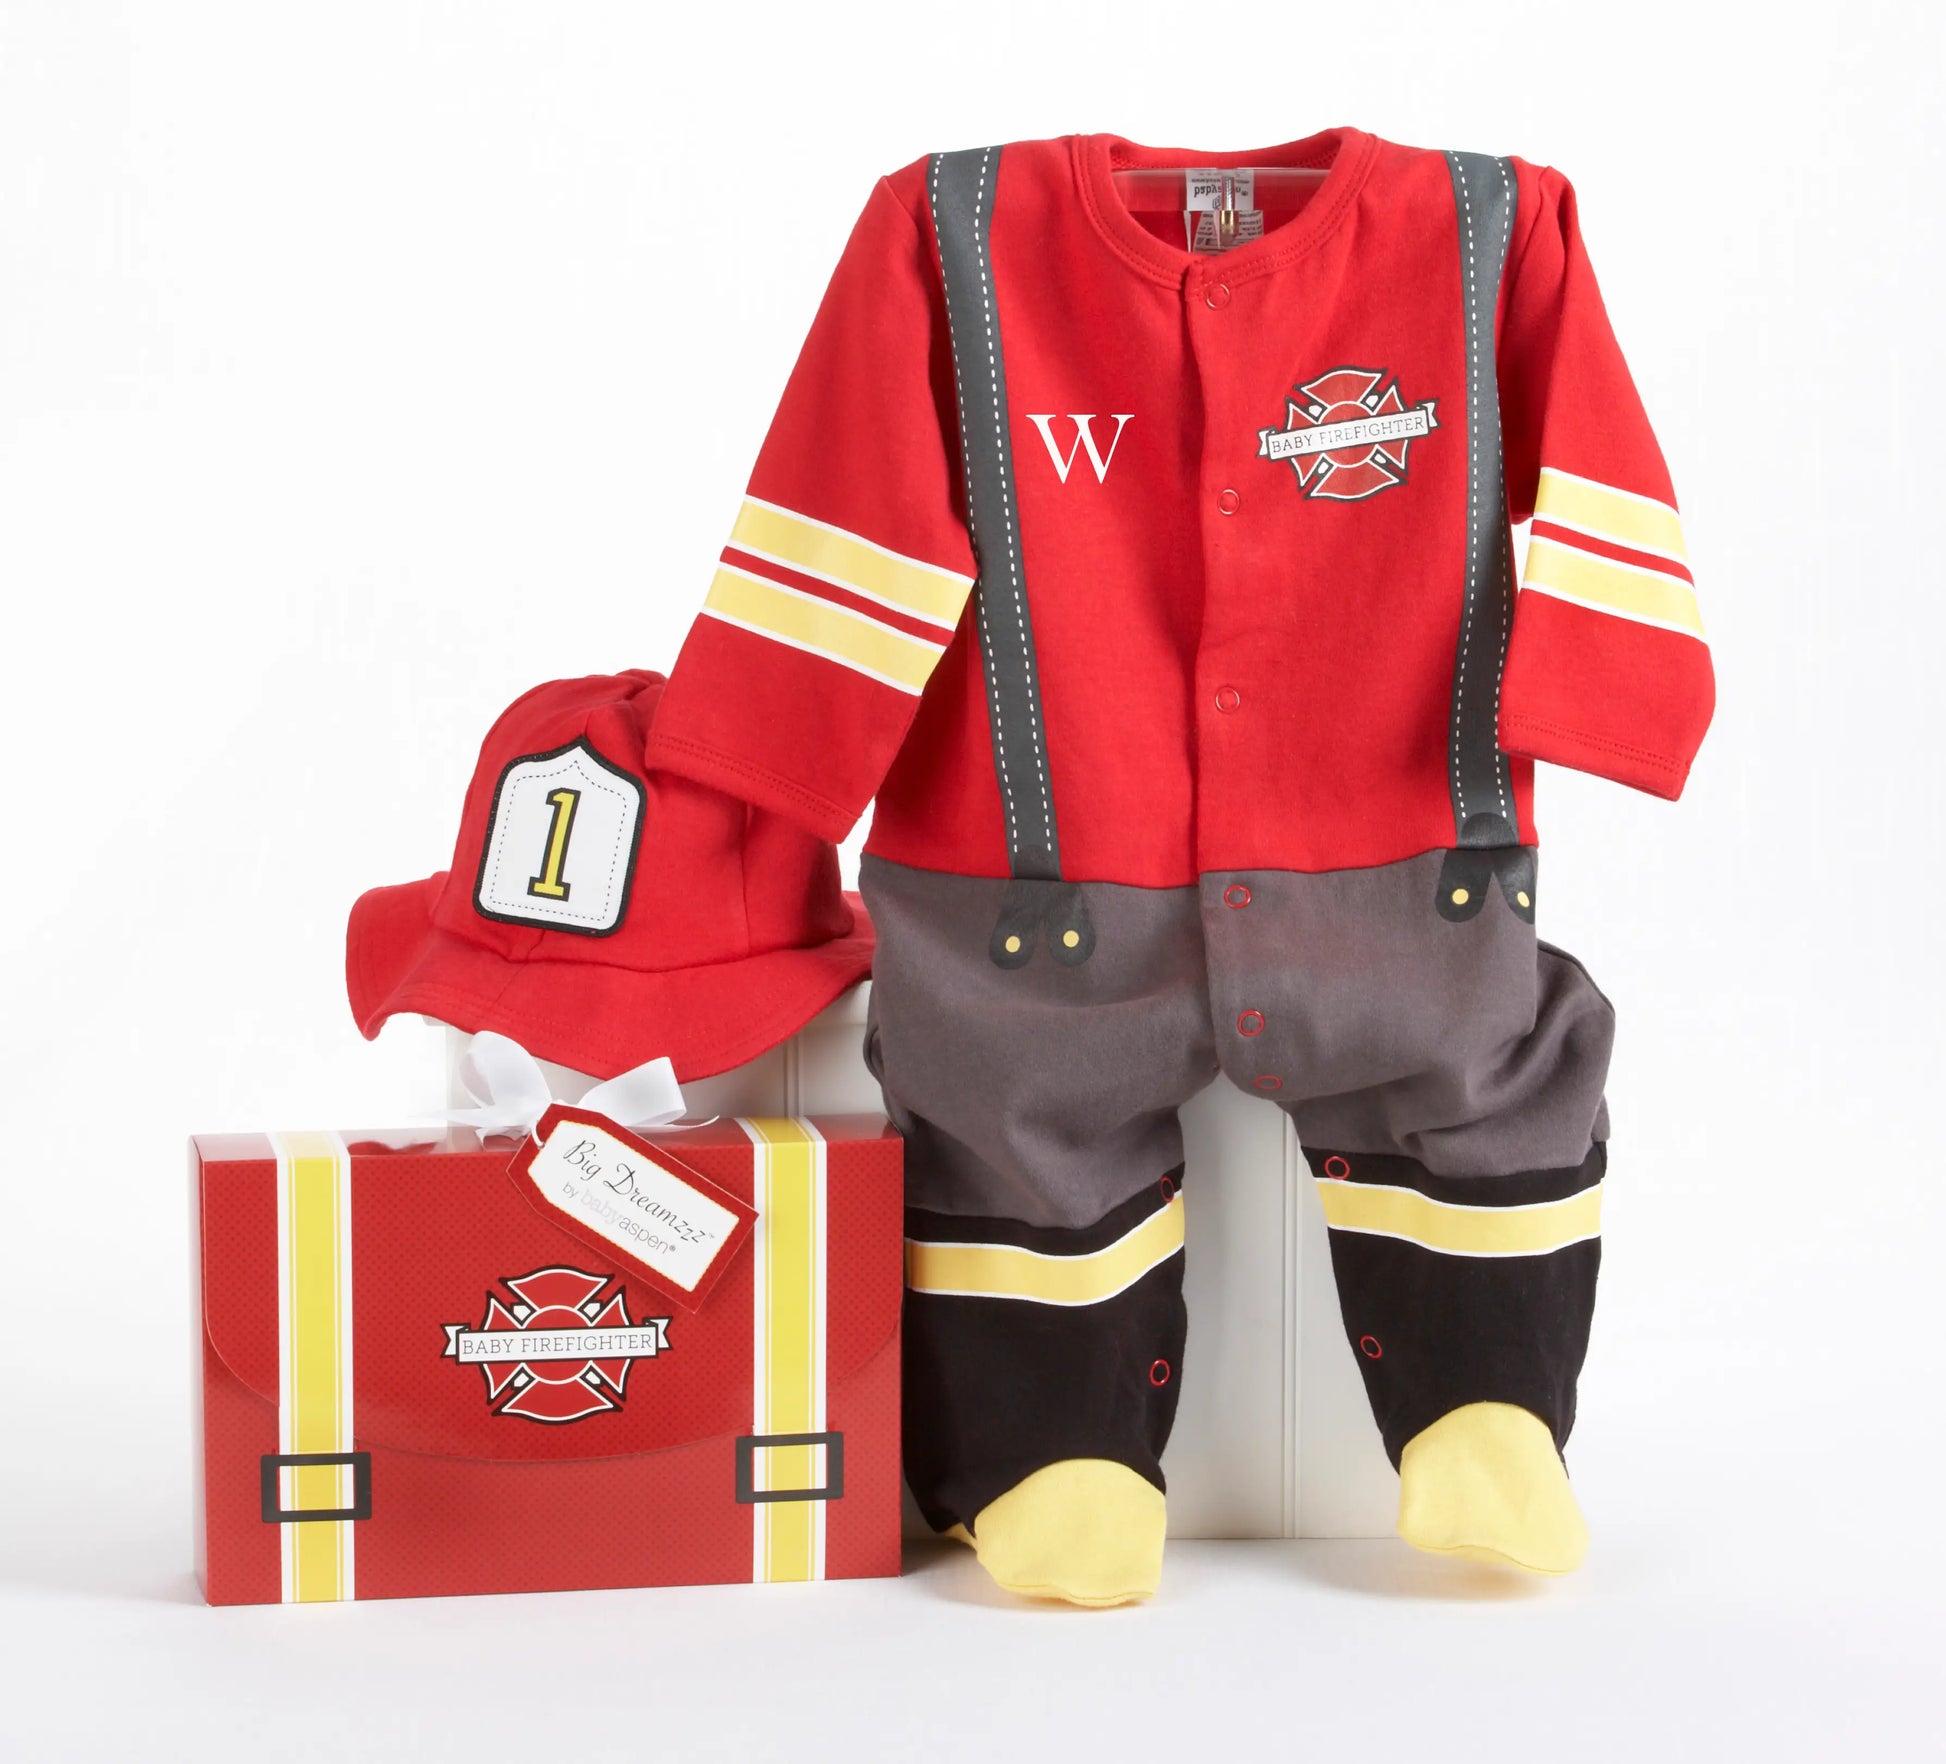 Big Dreamzzz" Baby Firefighter Two-Piece Layette Gift Box - Spellbound